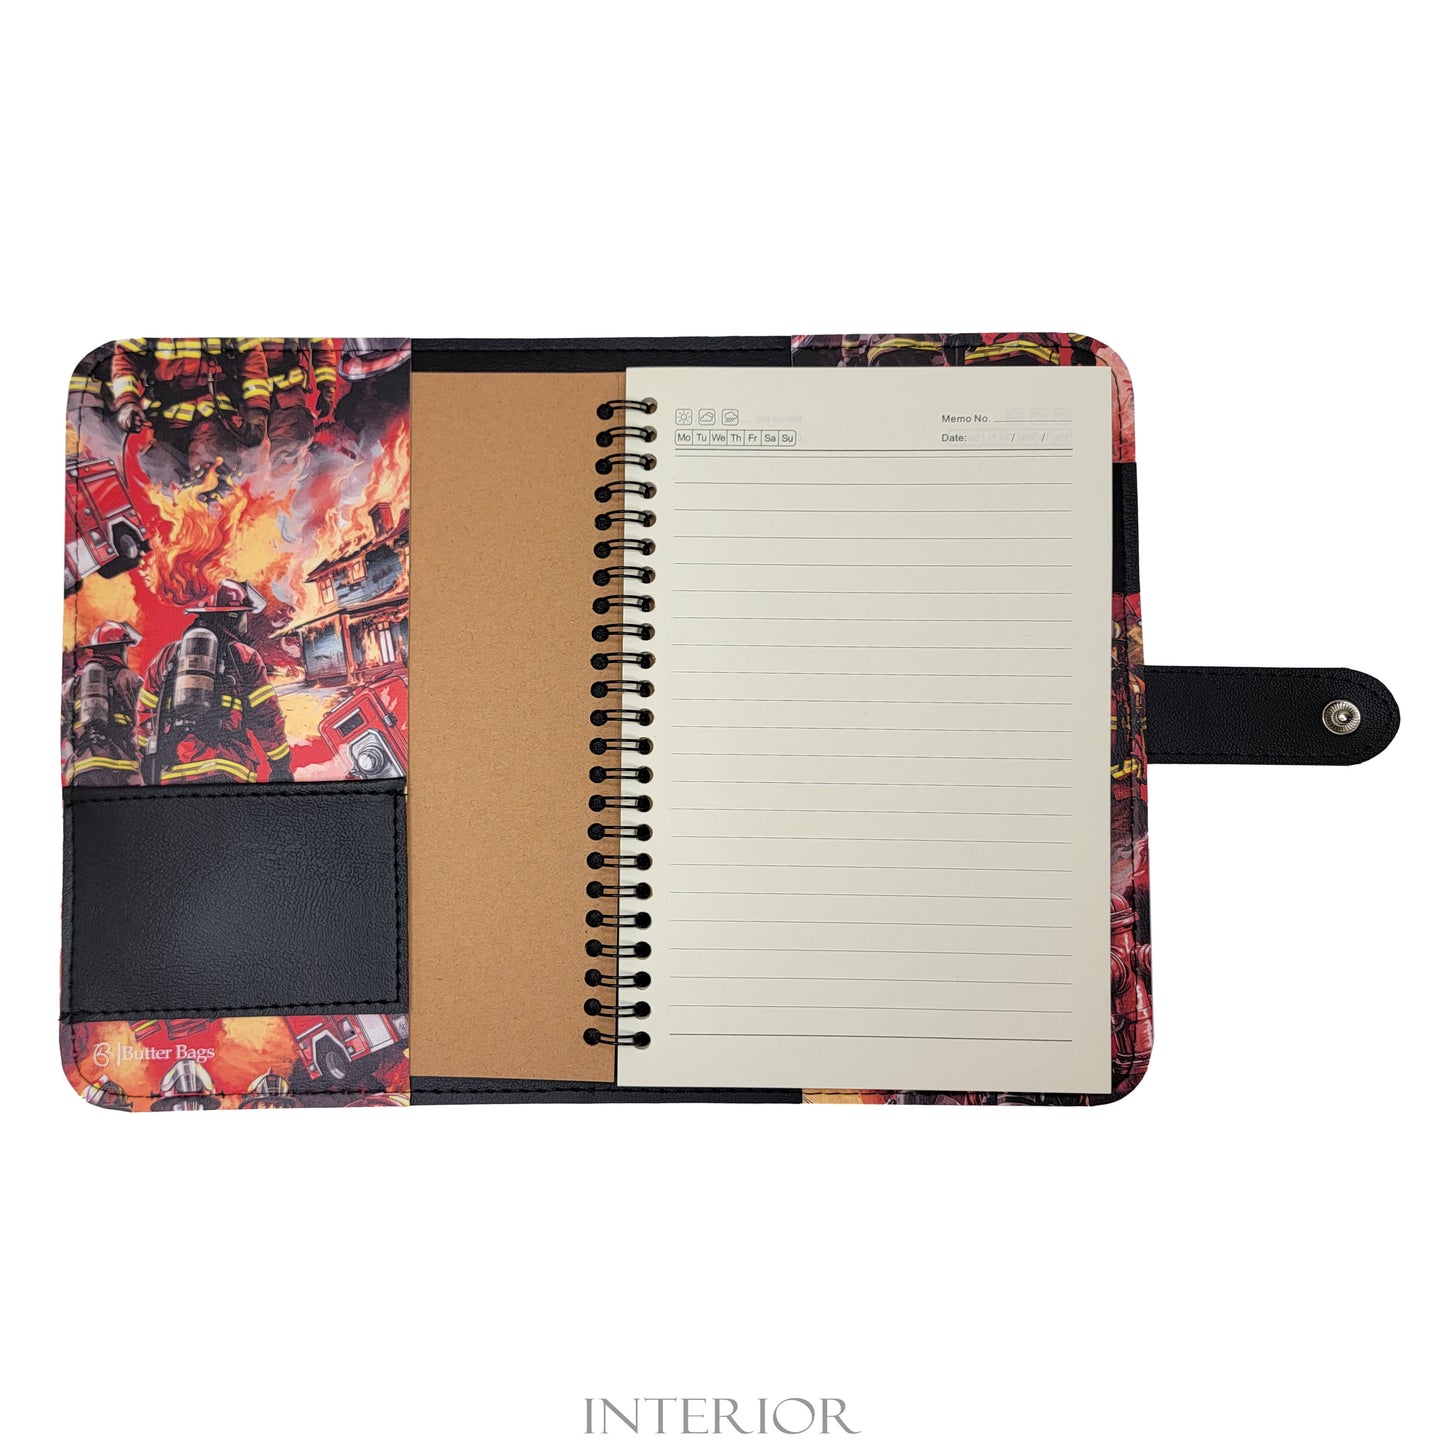 Firefighter- Notebook & Cover